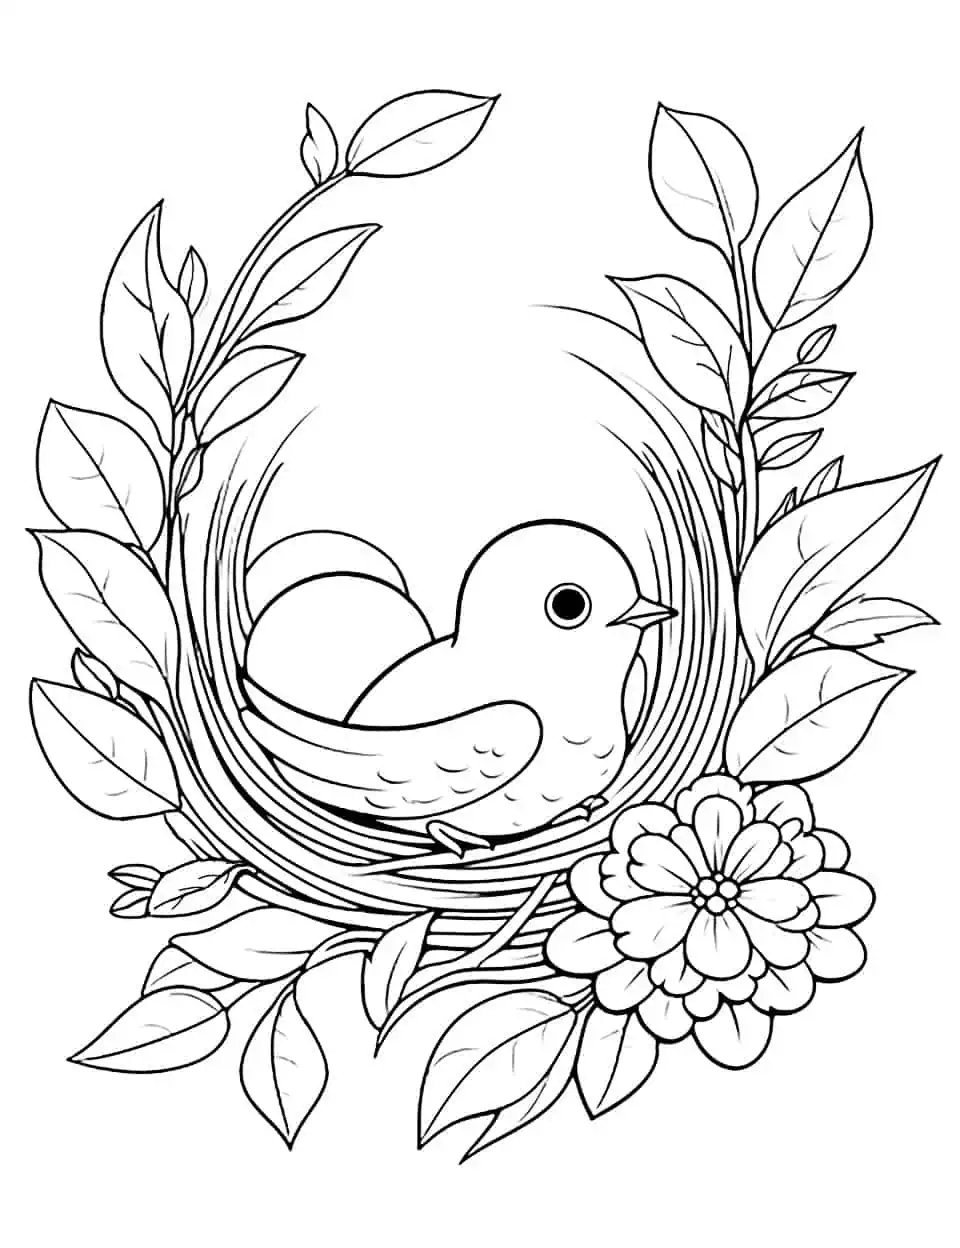 Colorful Bird's Nest Spring Coloring Page - A detailed coloring sheet featuring a bird’s nest with eggs amidst blooming flowers.